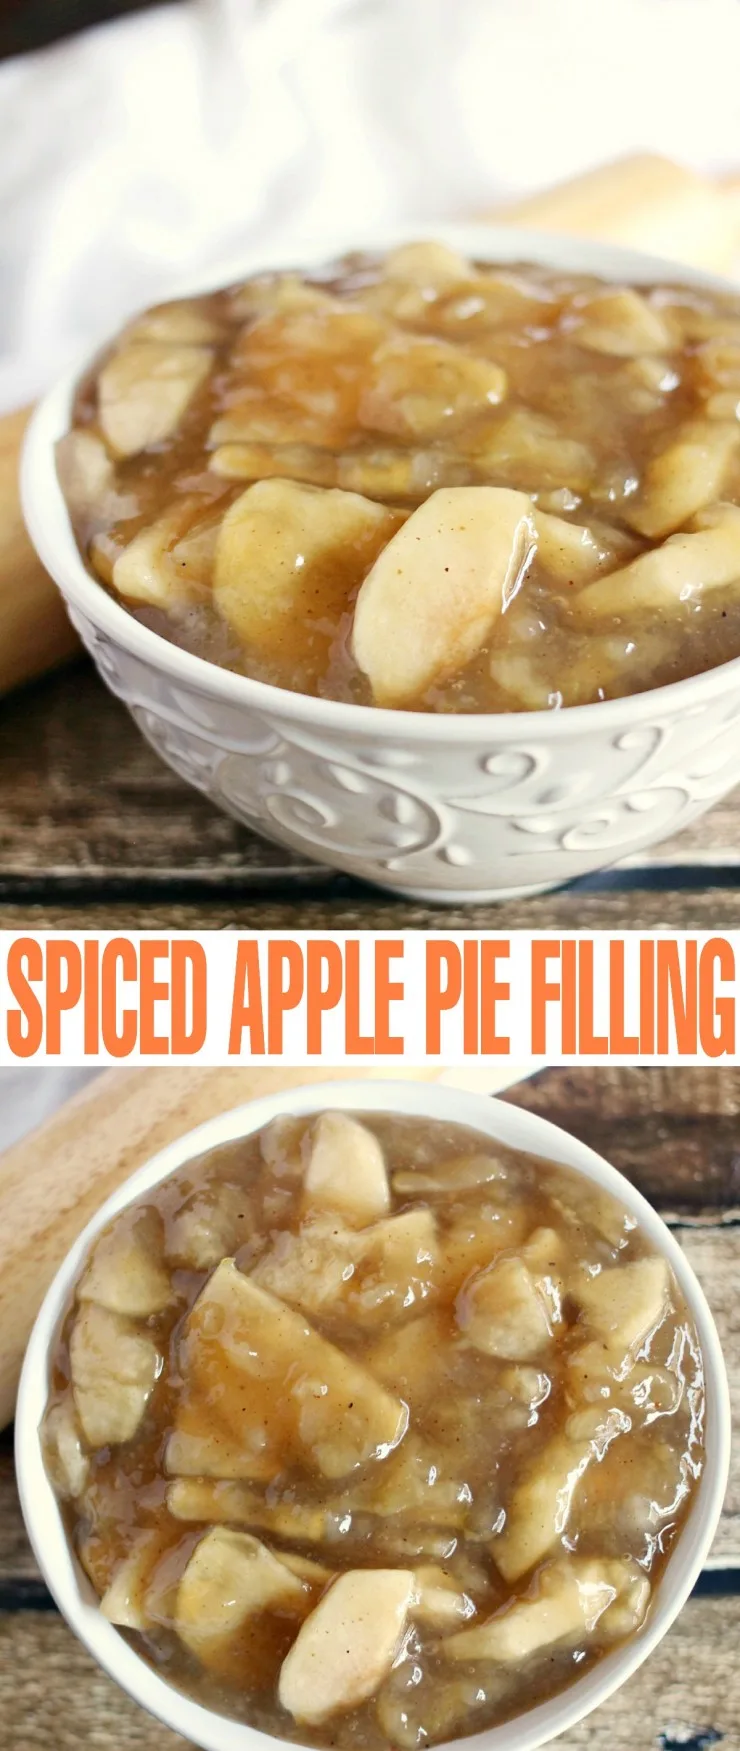 Spiced Apple Pie Filling is perfect for freezing and canning so you can make your favourite apple dessert recipe anytime in a breeze!